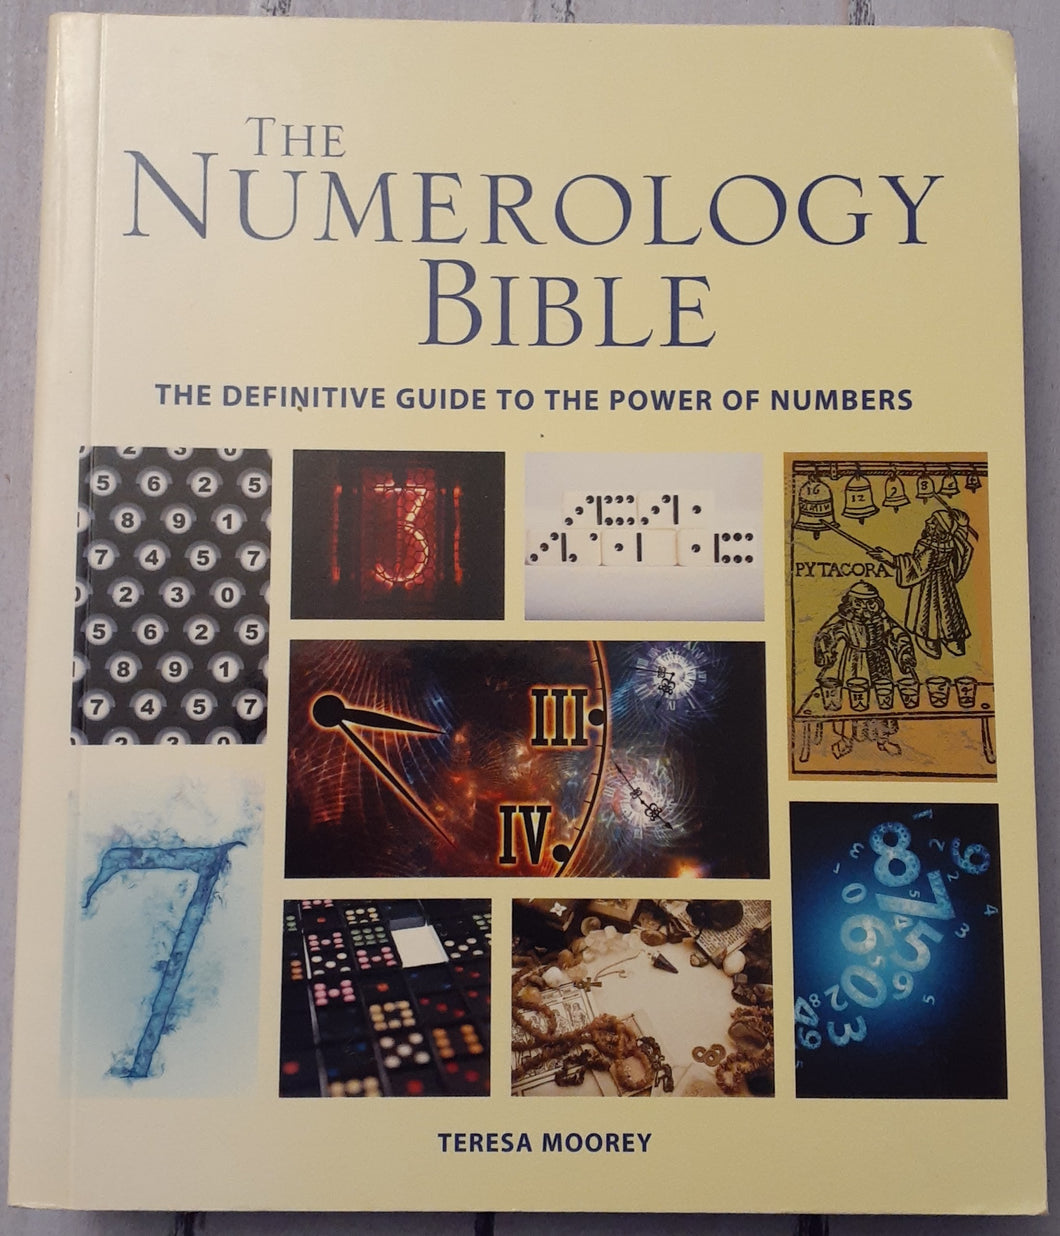 The Numerology Bible